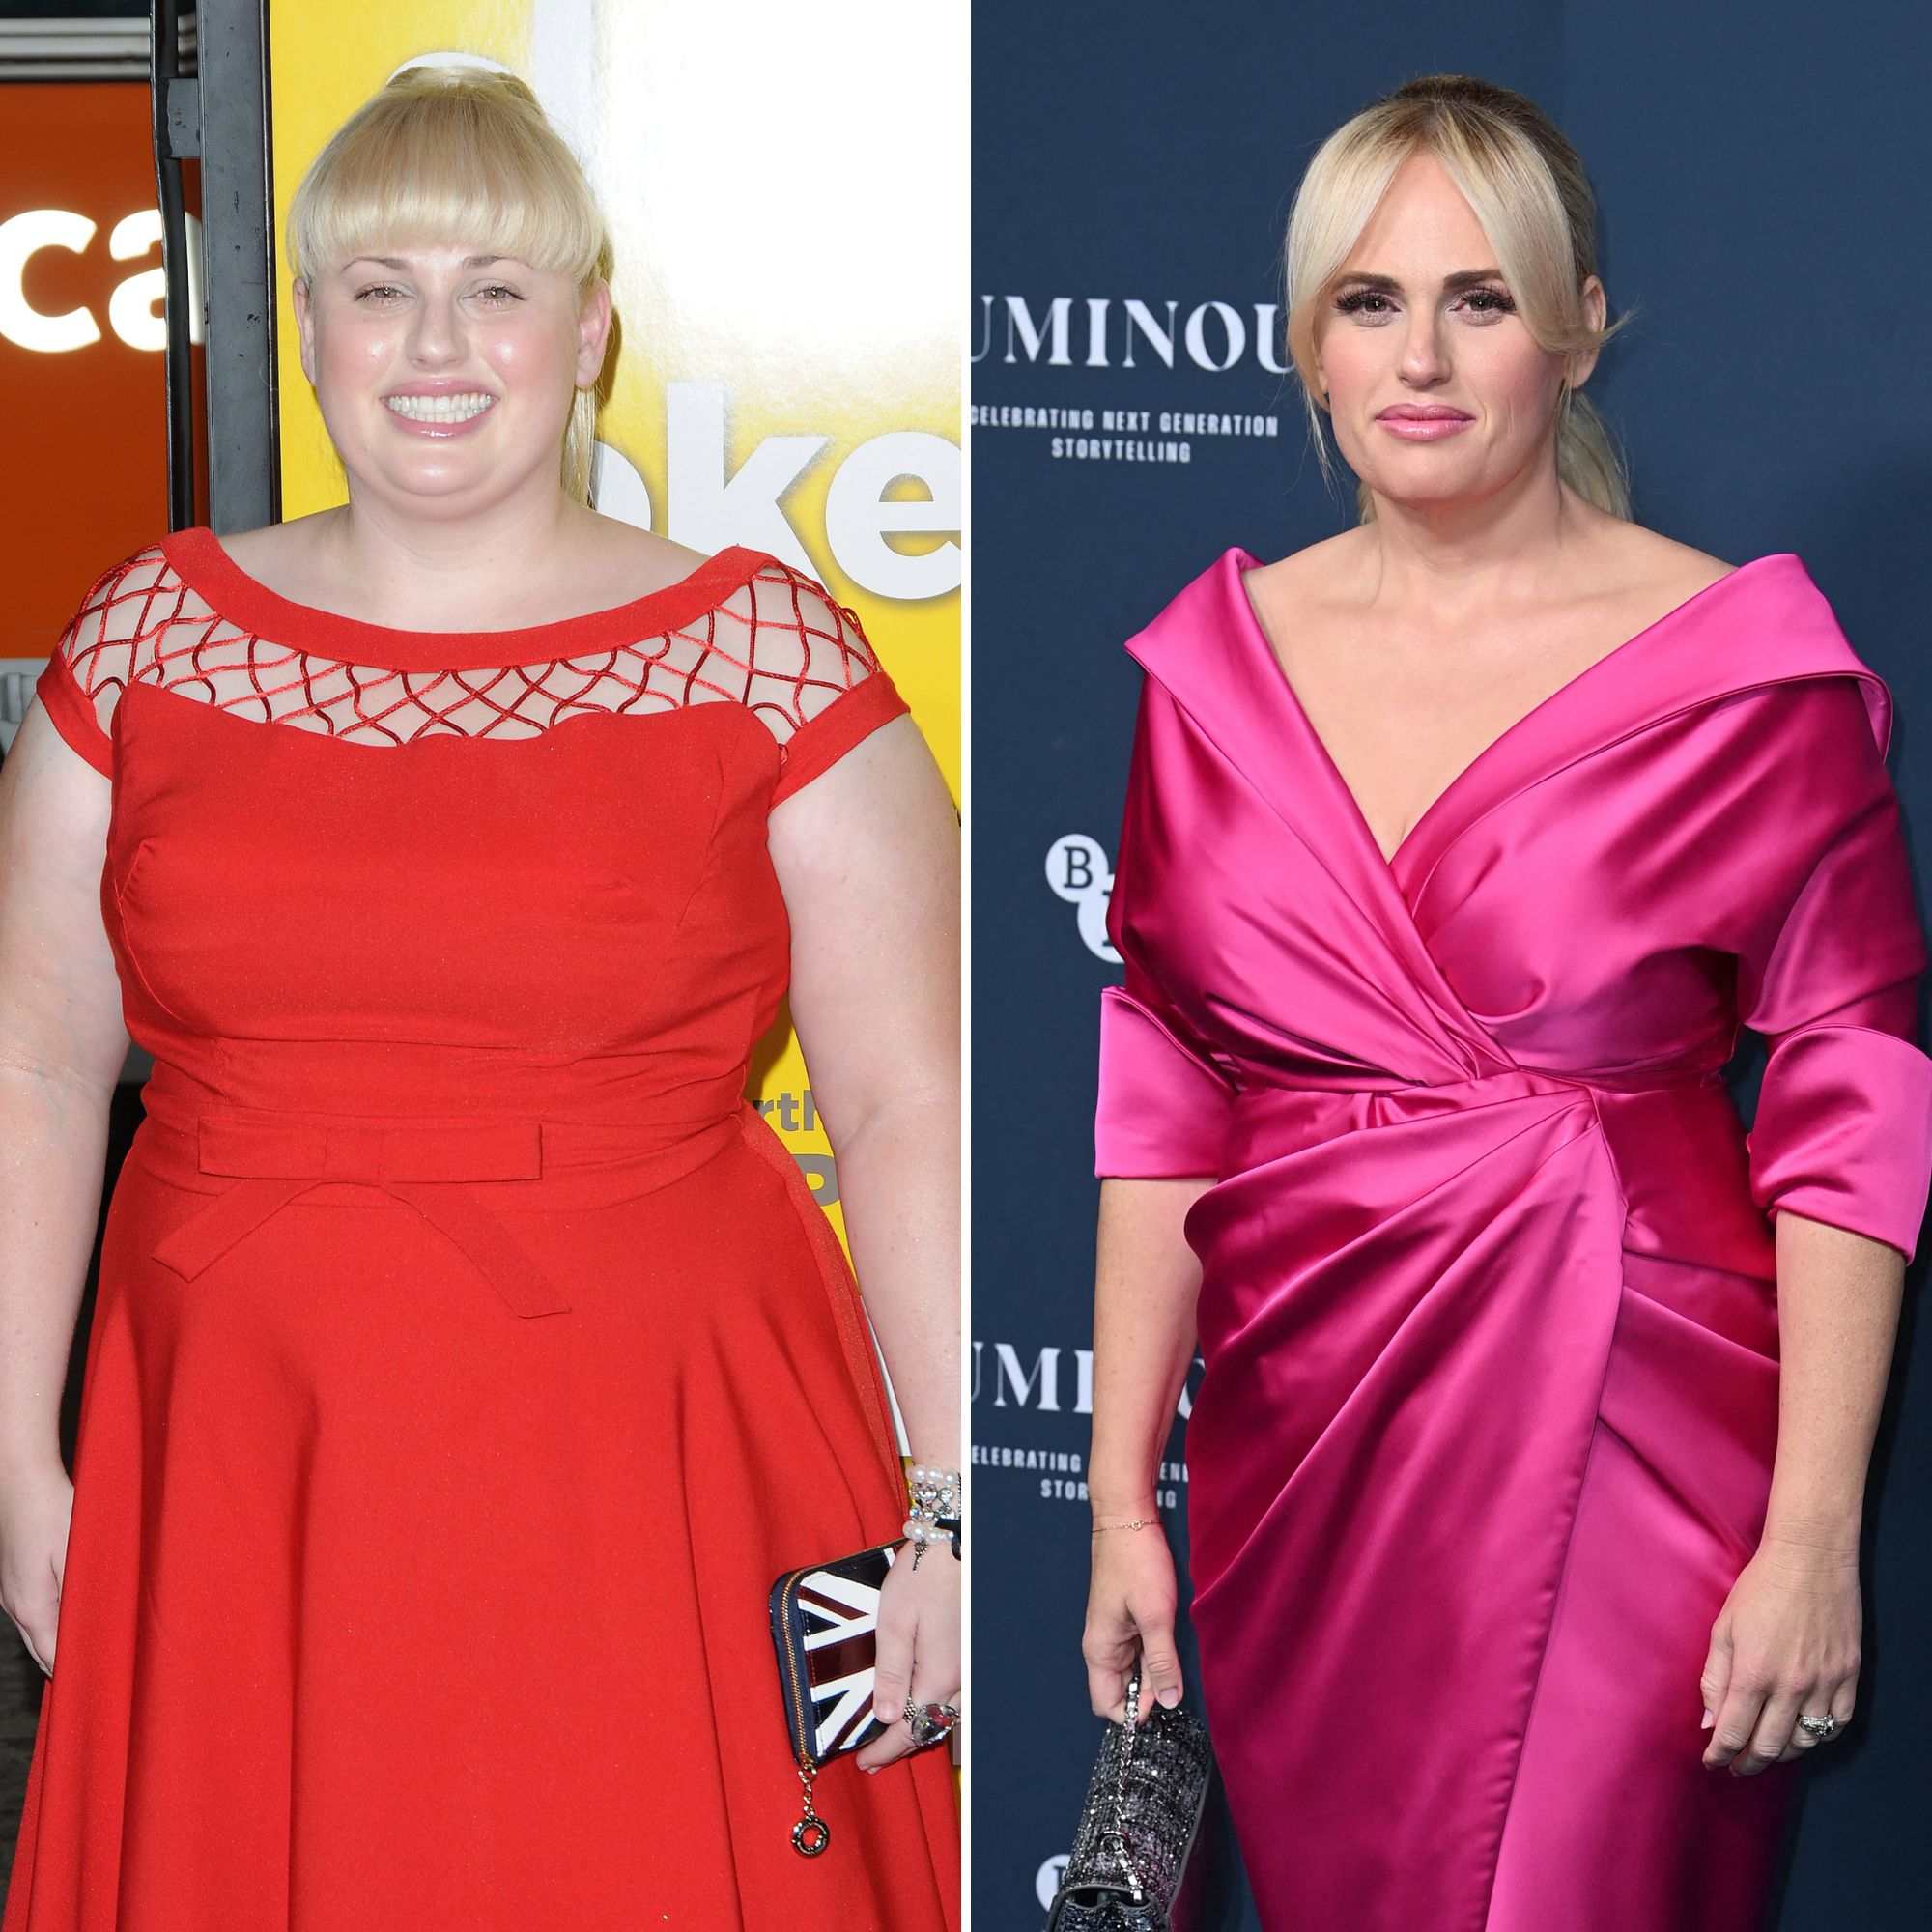 18 Year Old Skinny Babe Gets Drilled By A Big Fat - Rebel Wilson Weight Loss: Before and After Transformation Photos